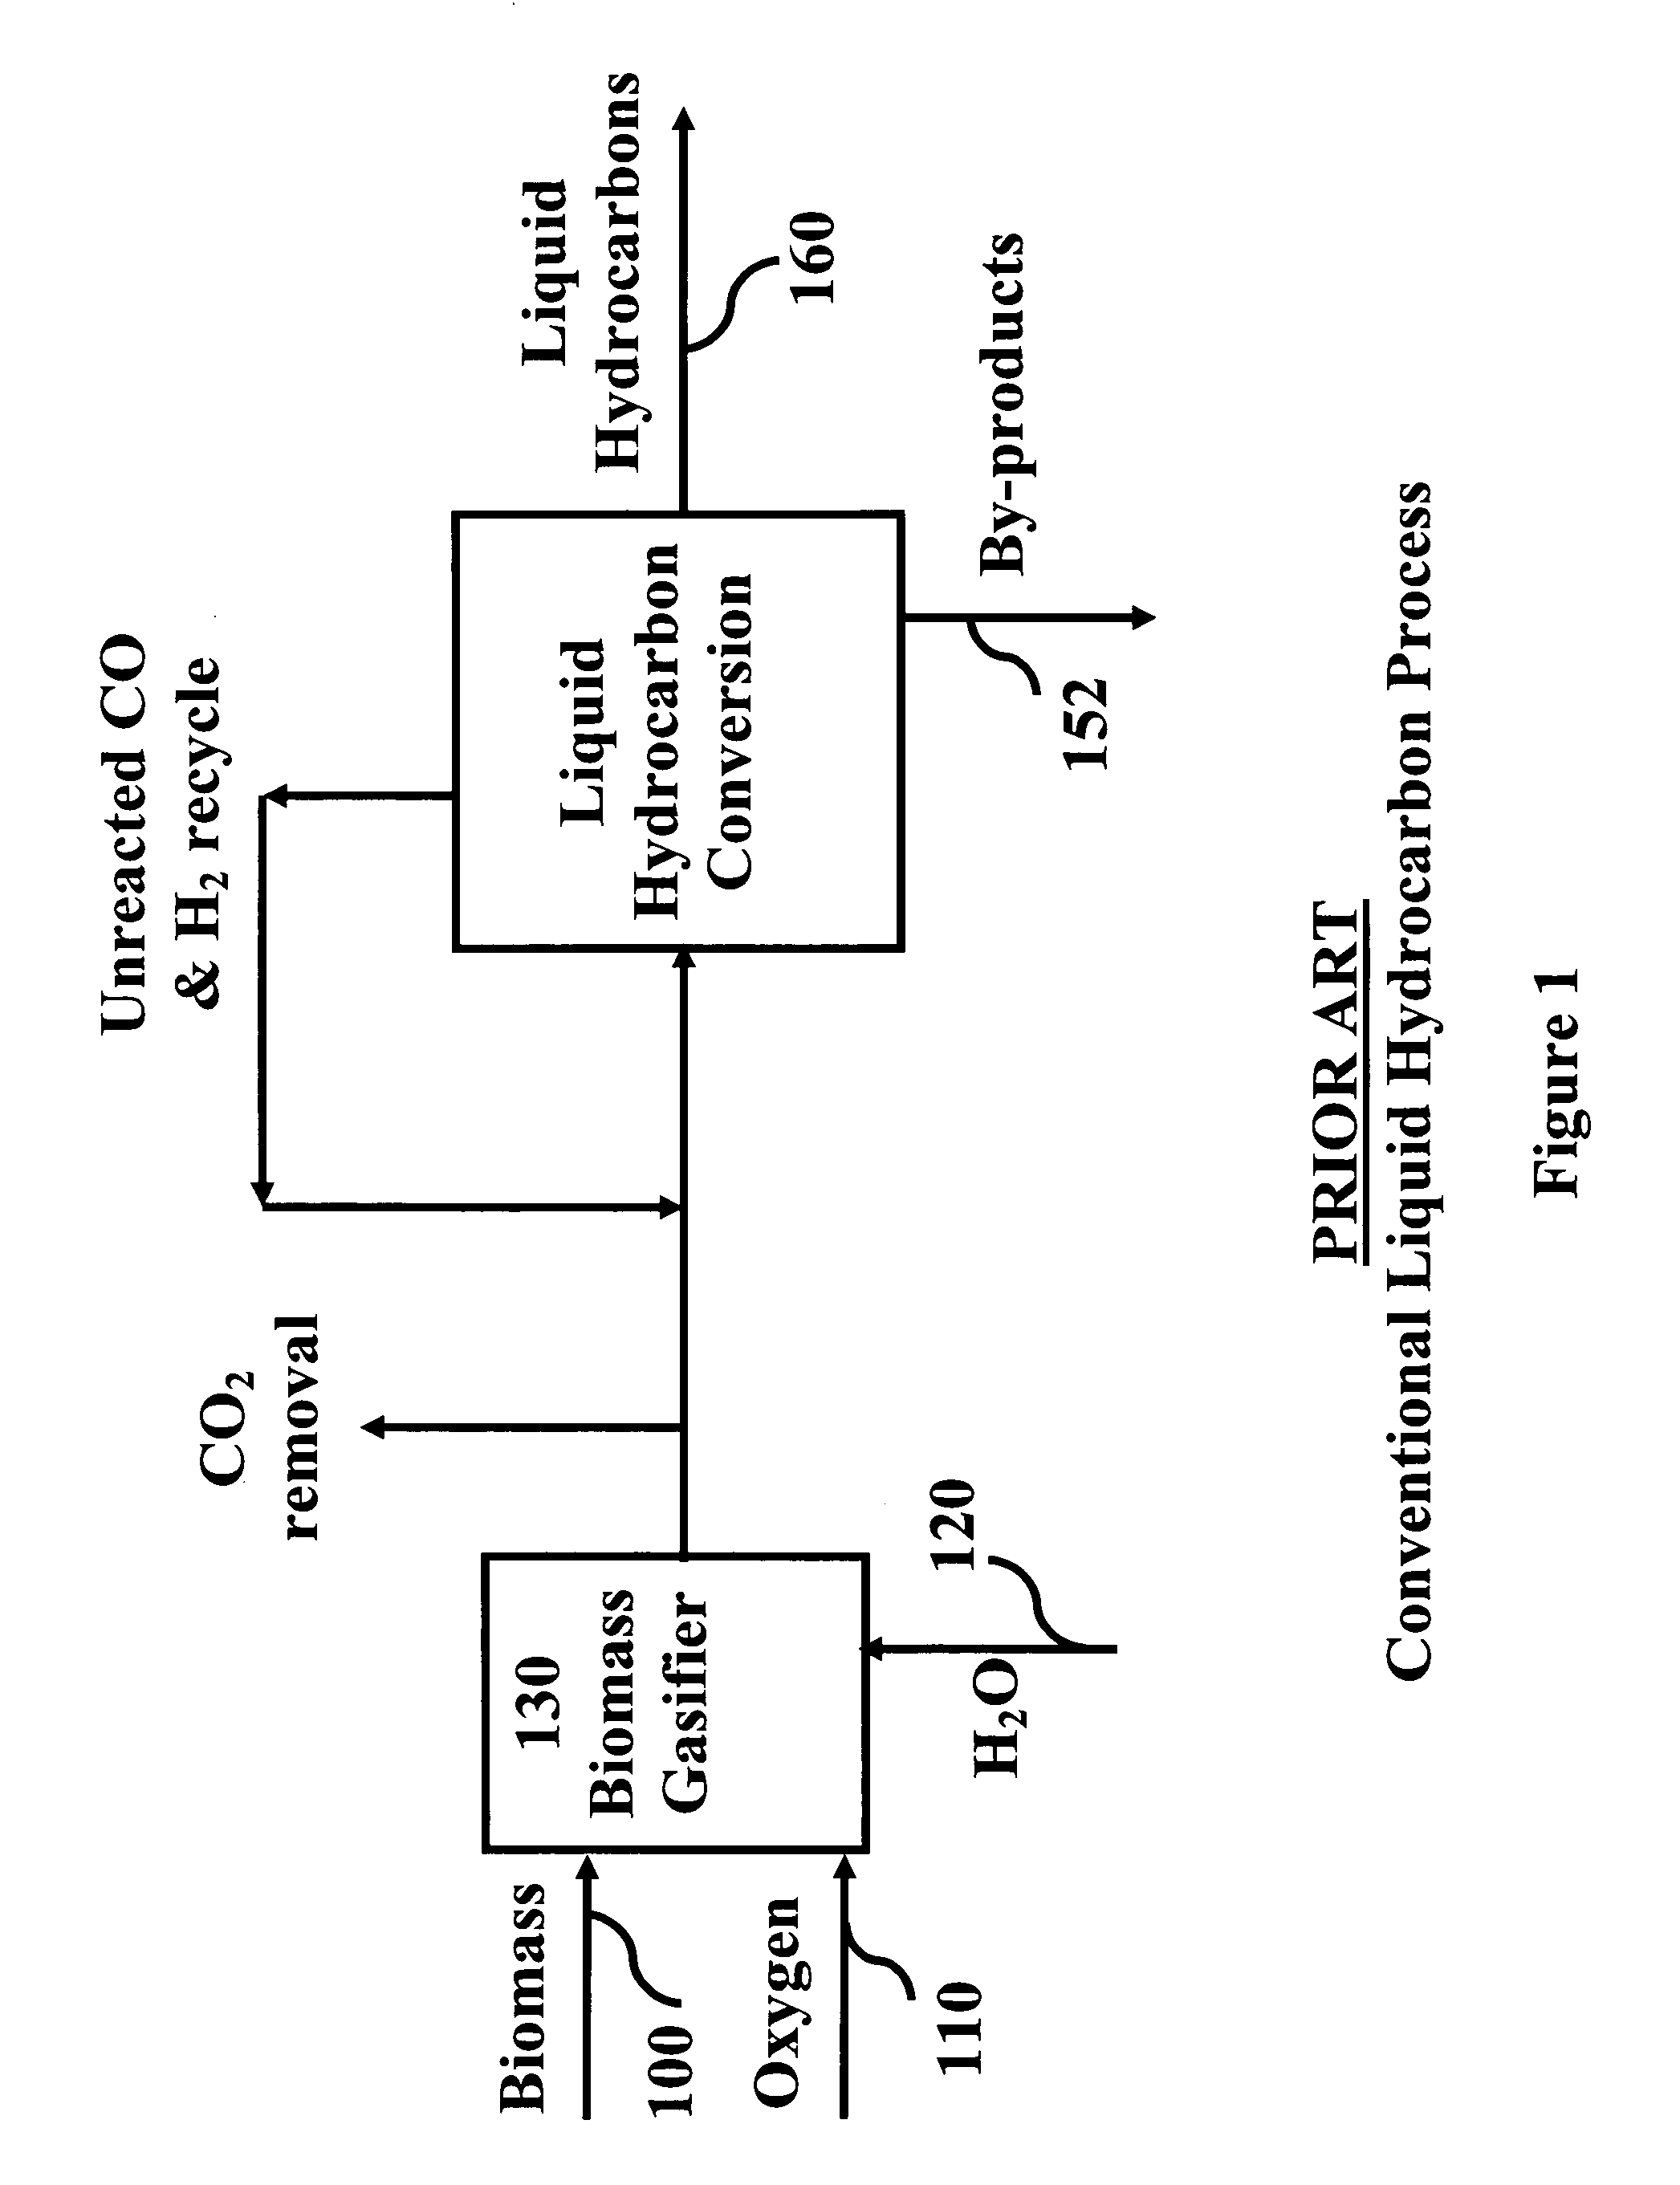 System and process for producing synthetic liquid hydrocarbon